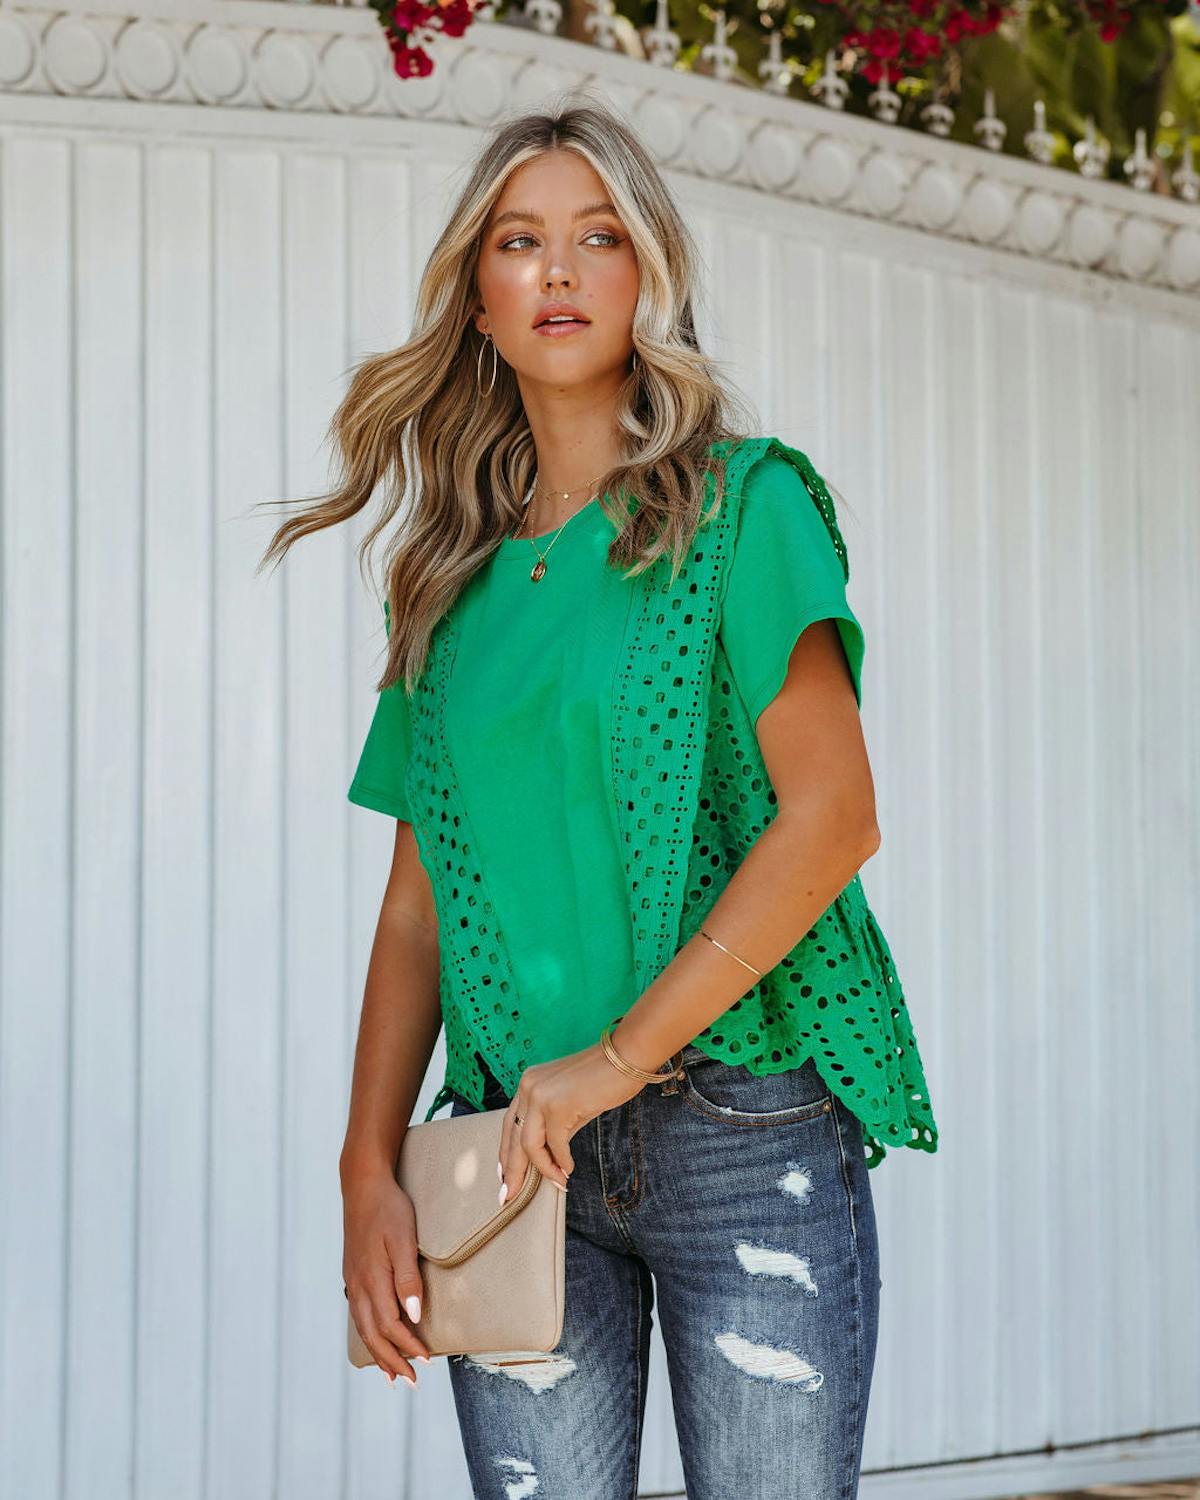 Gwena Cotton Eyelet Tee - Emerald - LAST CHANCE view 1